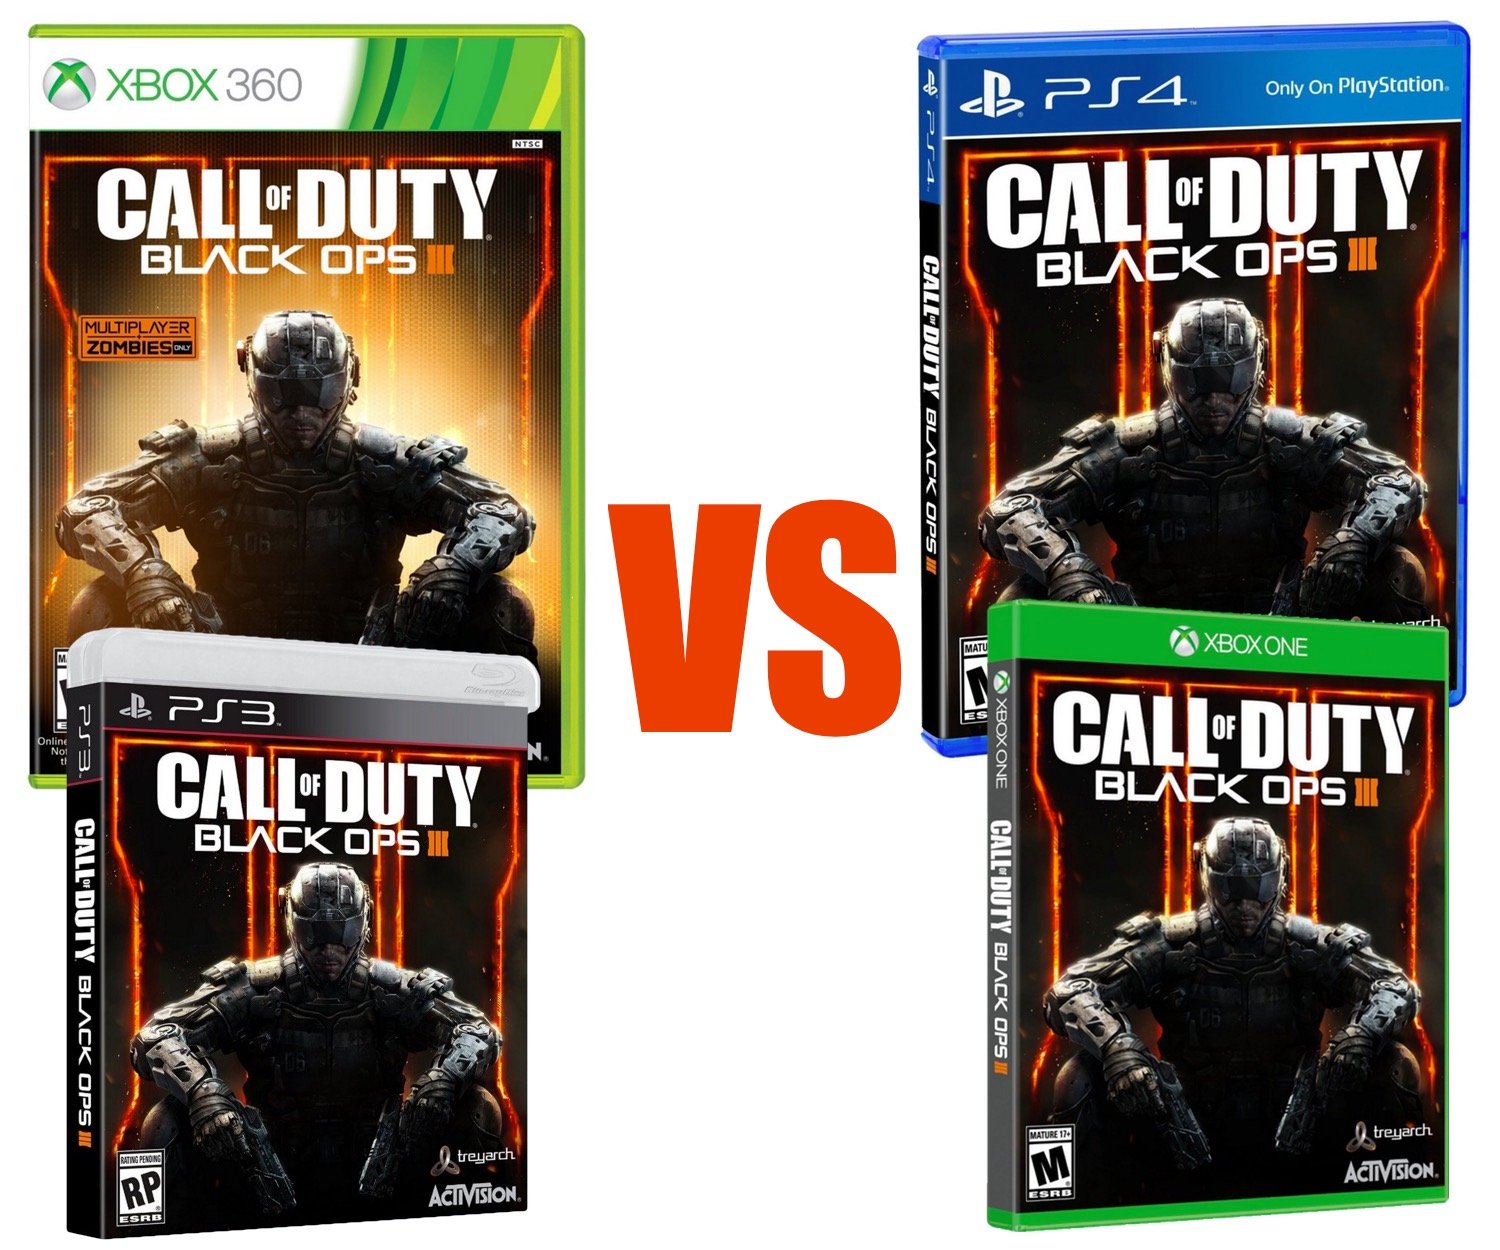 Outlook soep zout 7 Reasons Not to Buy Black Ops 3 on PS3 & Xbox 360